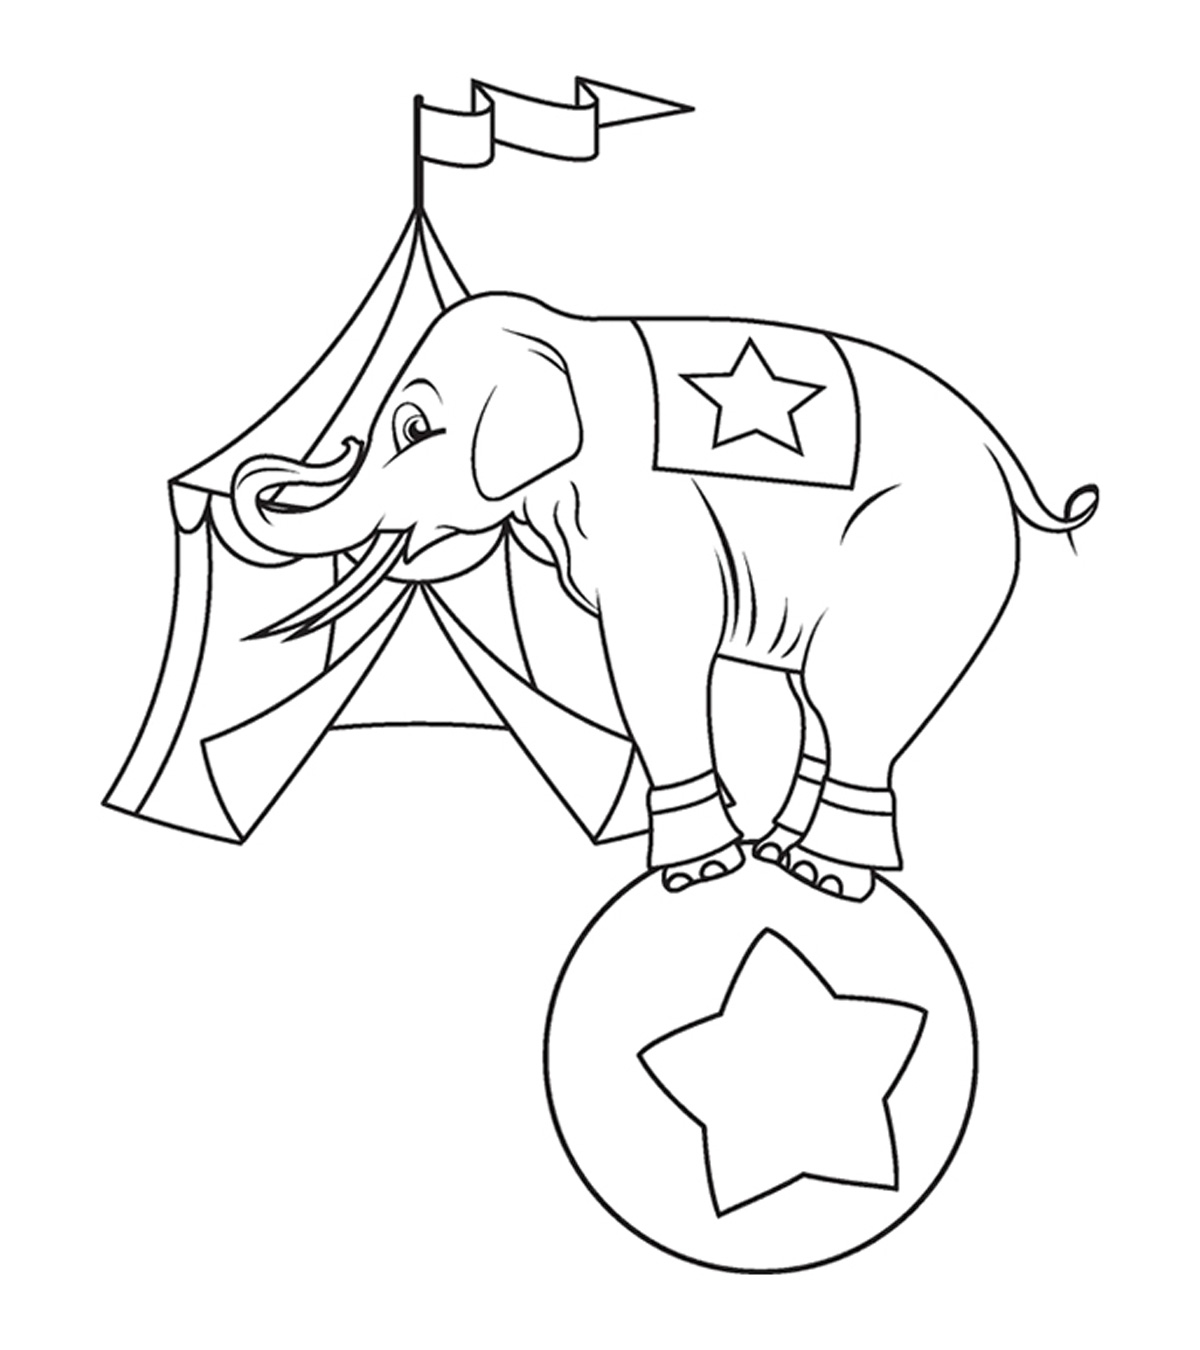 20 Cute Elephant Coloring Pages Your Toddler Will Love To Color_image